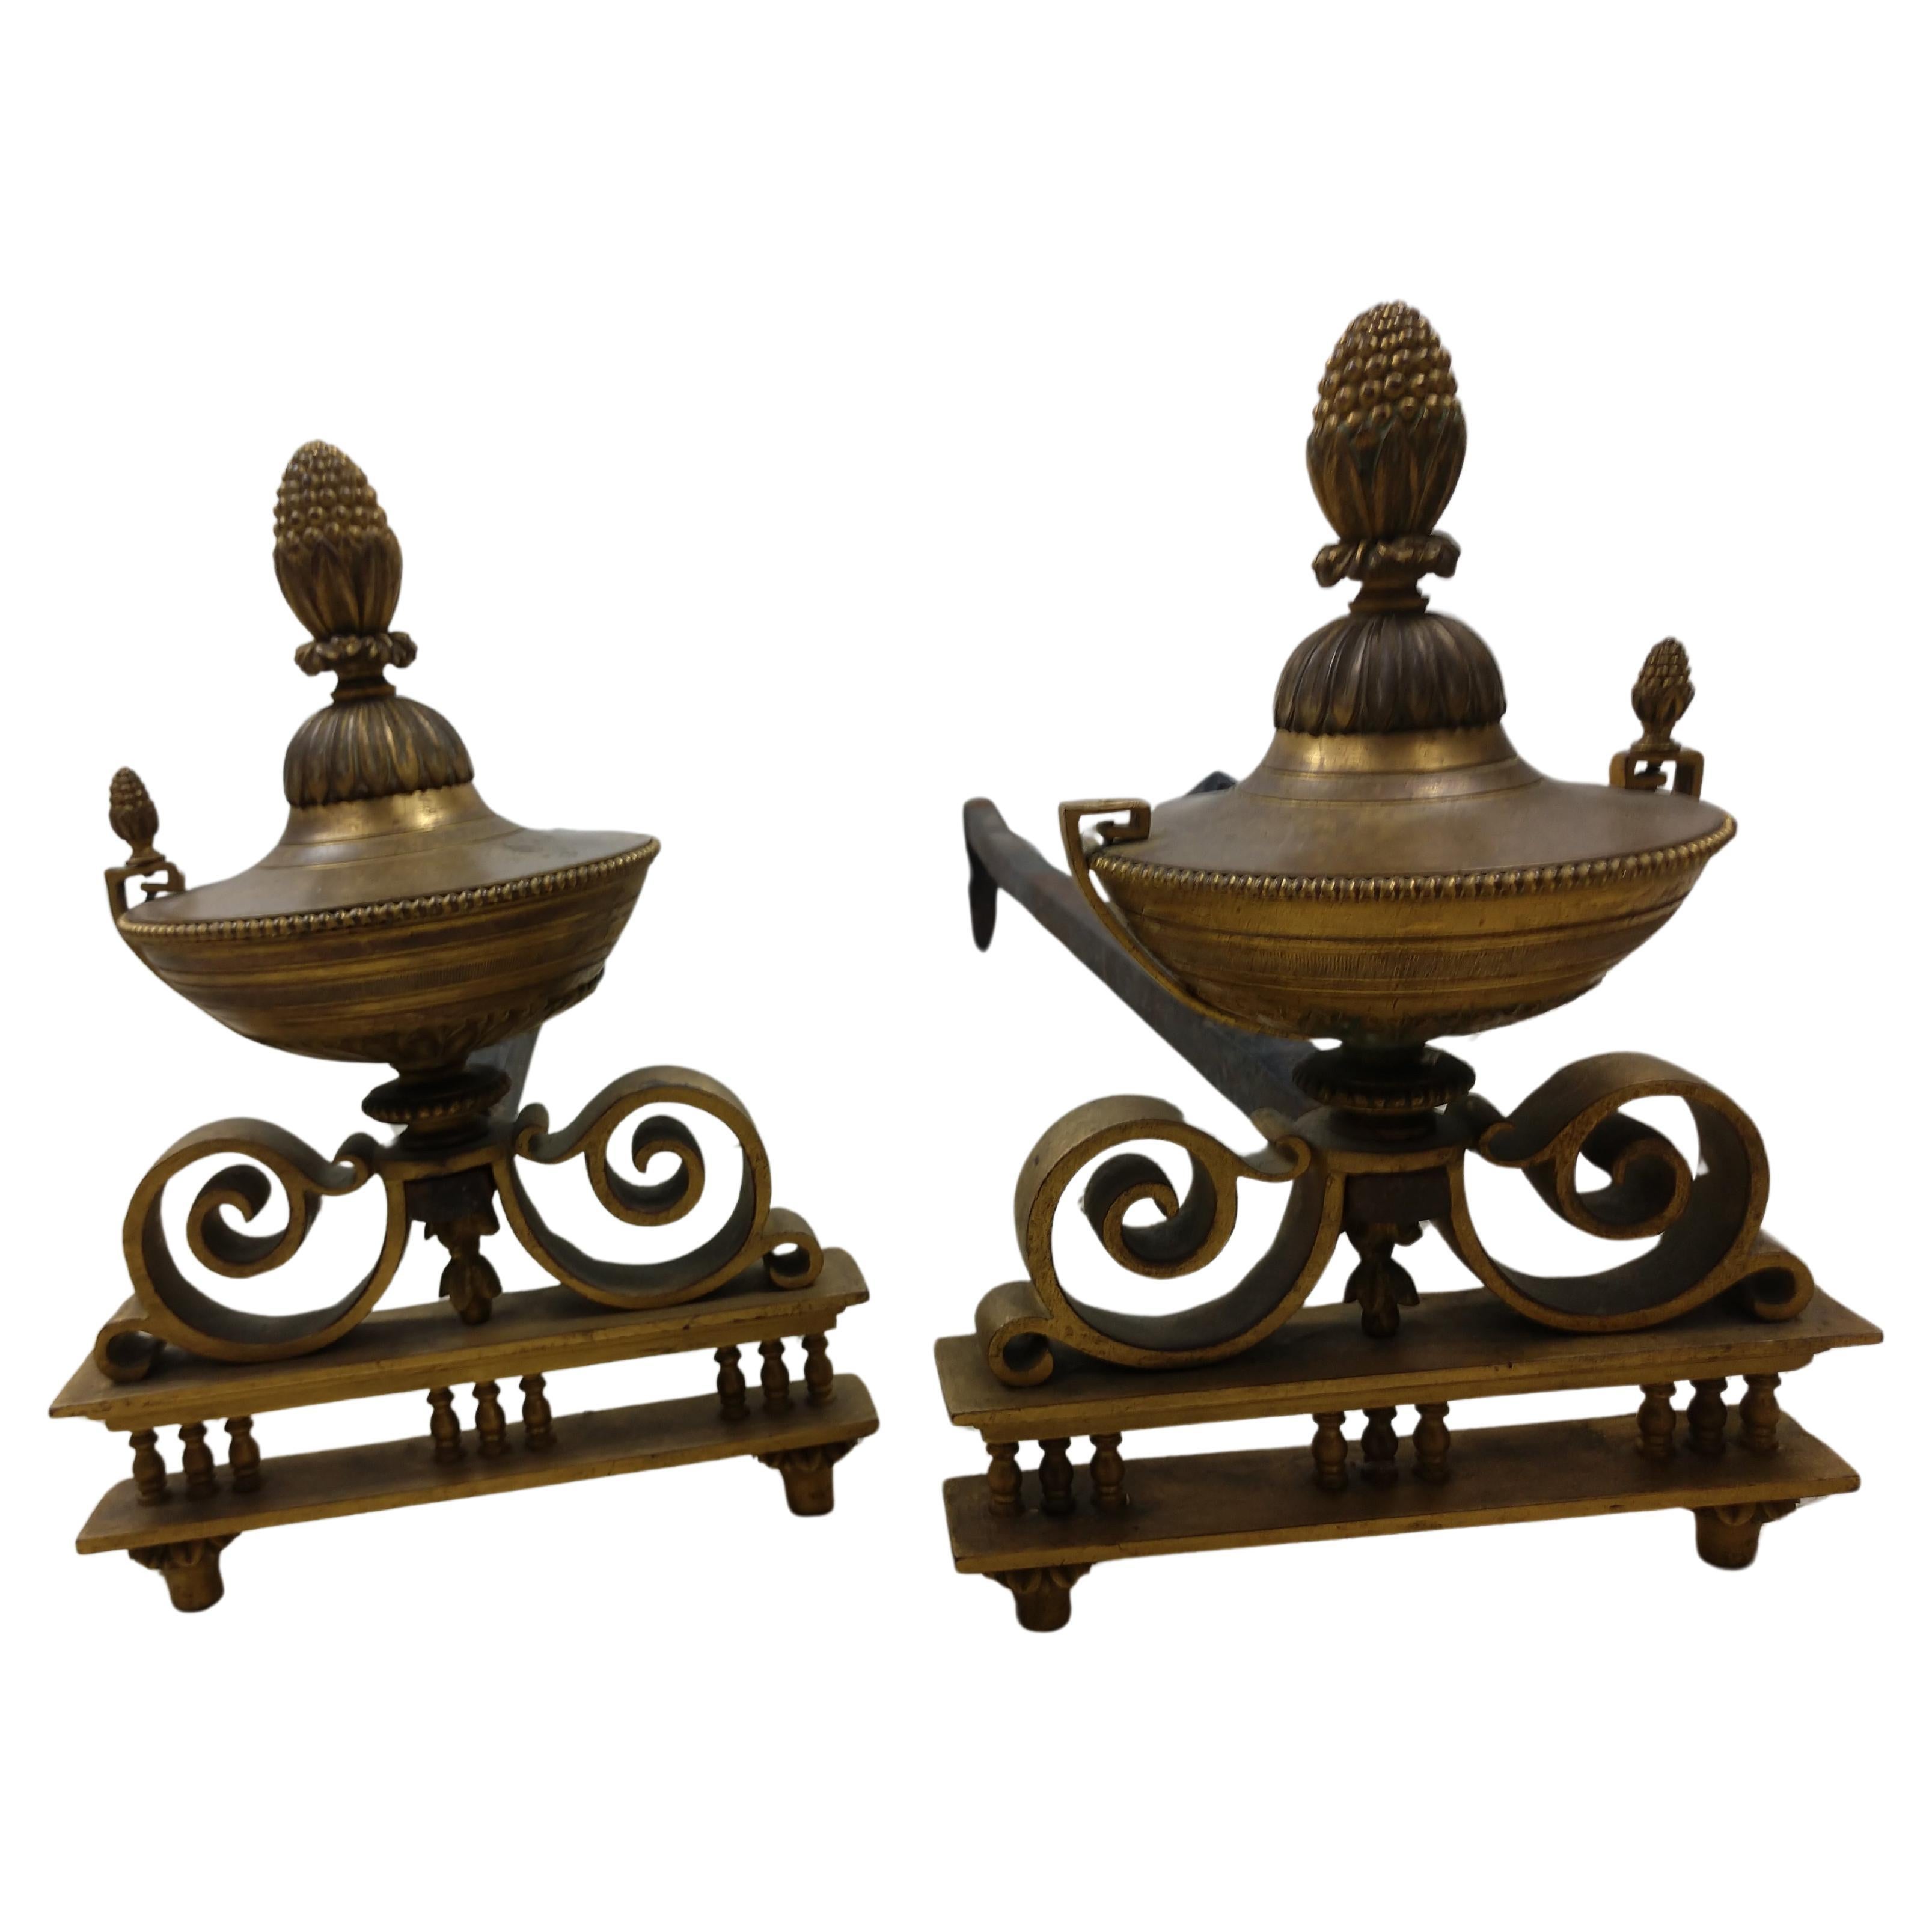 Pair of Antique Bronze Urn Form Fireplace Andirons